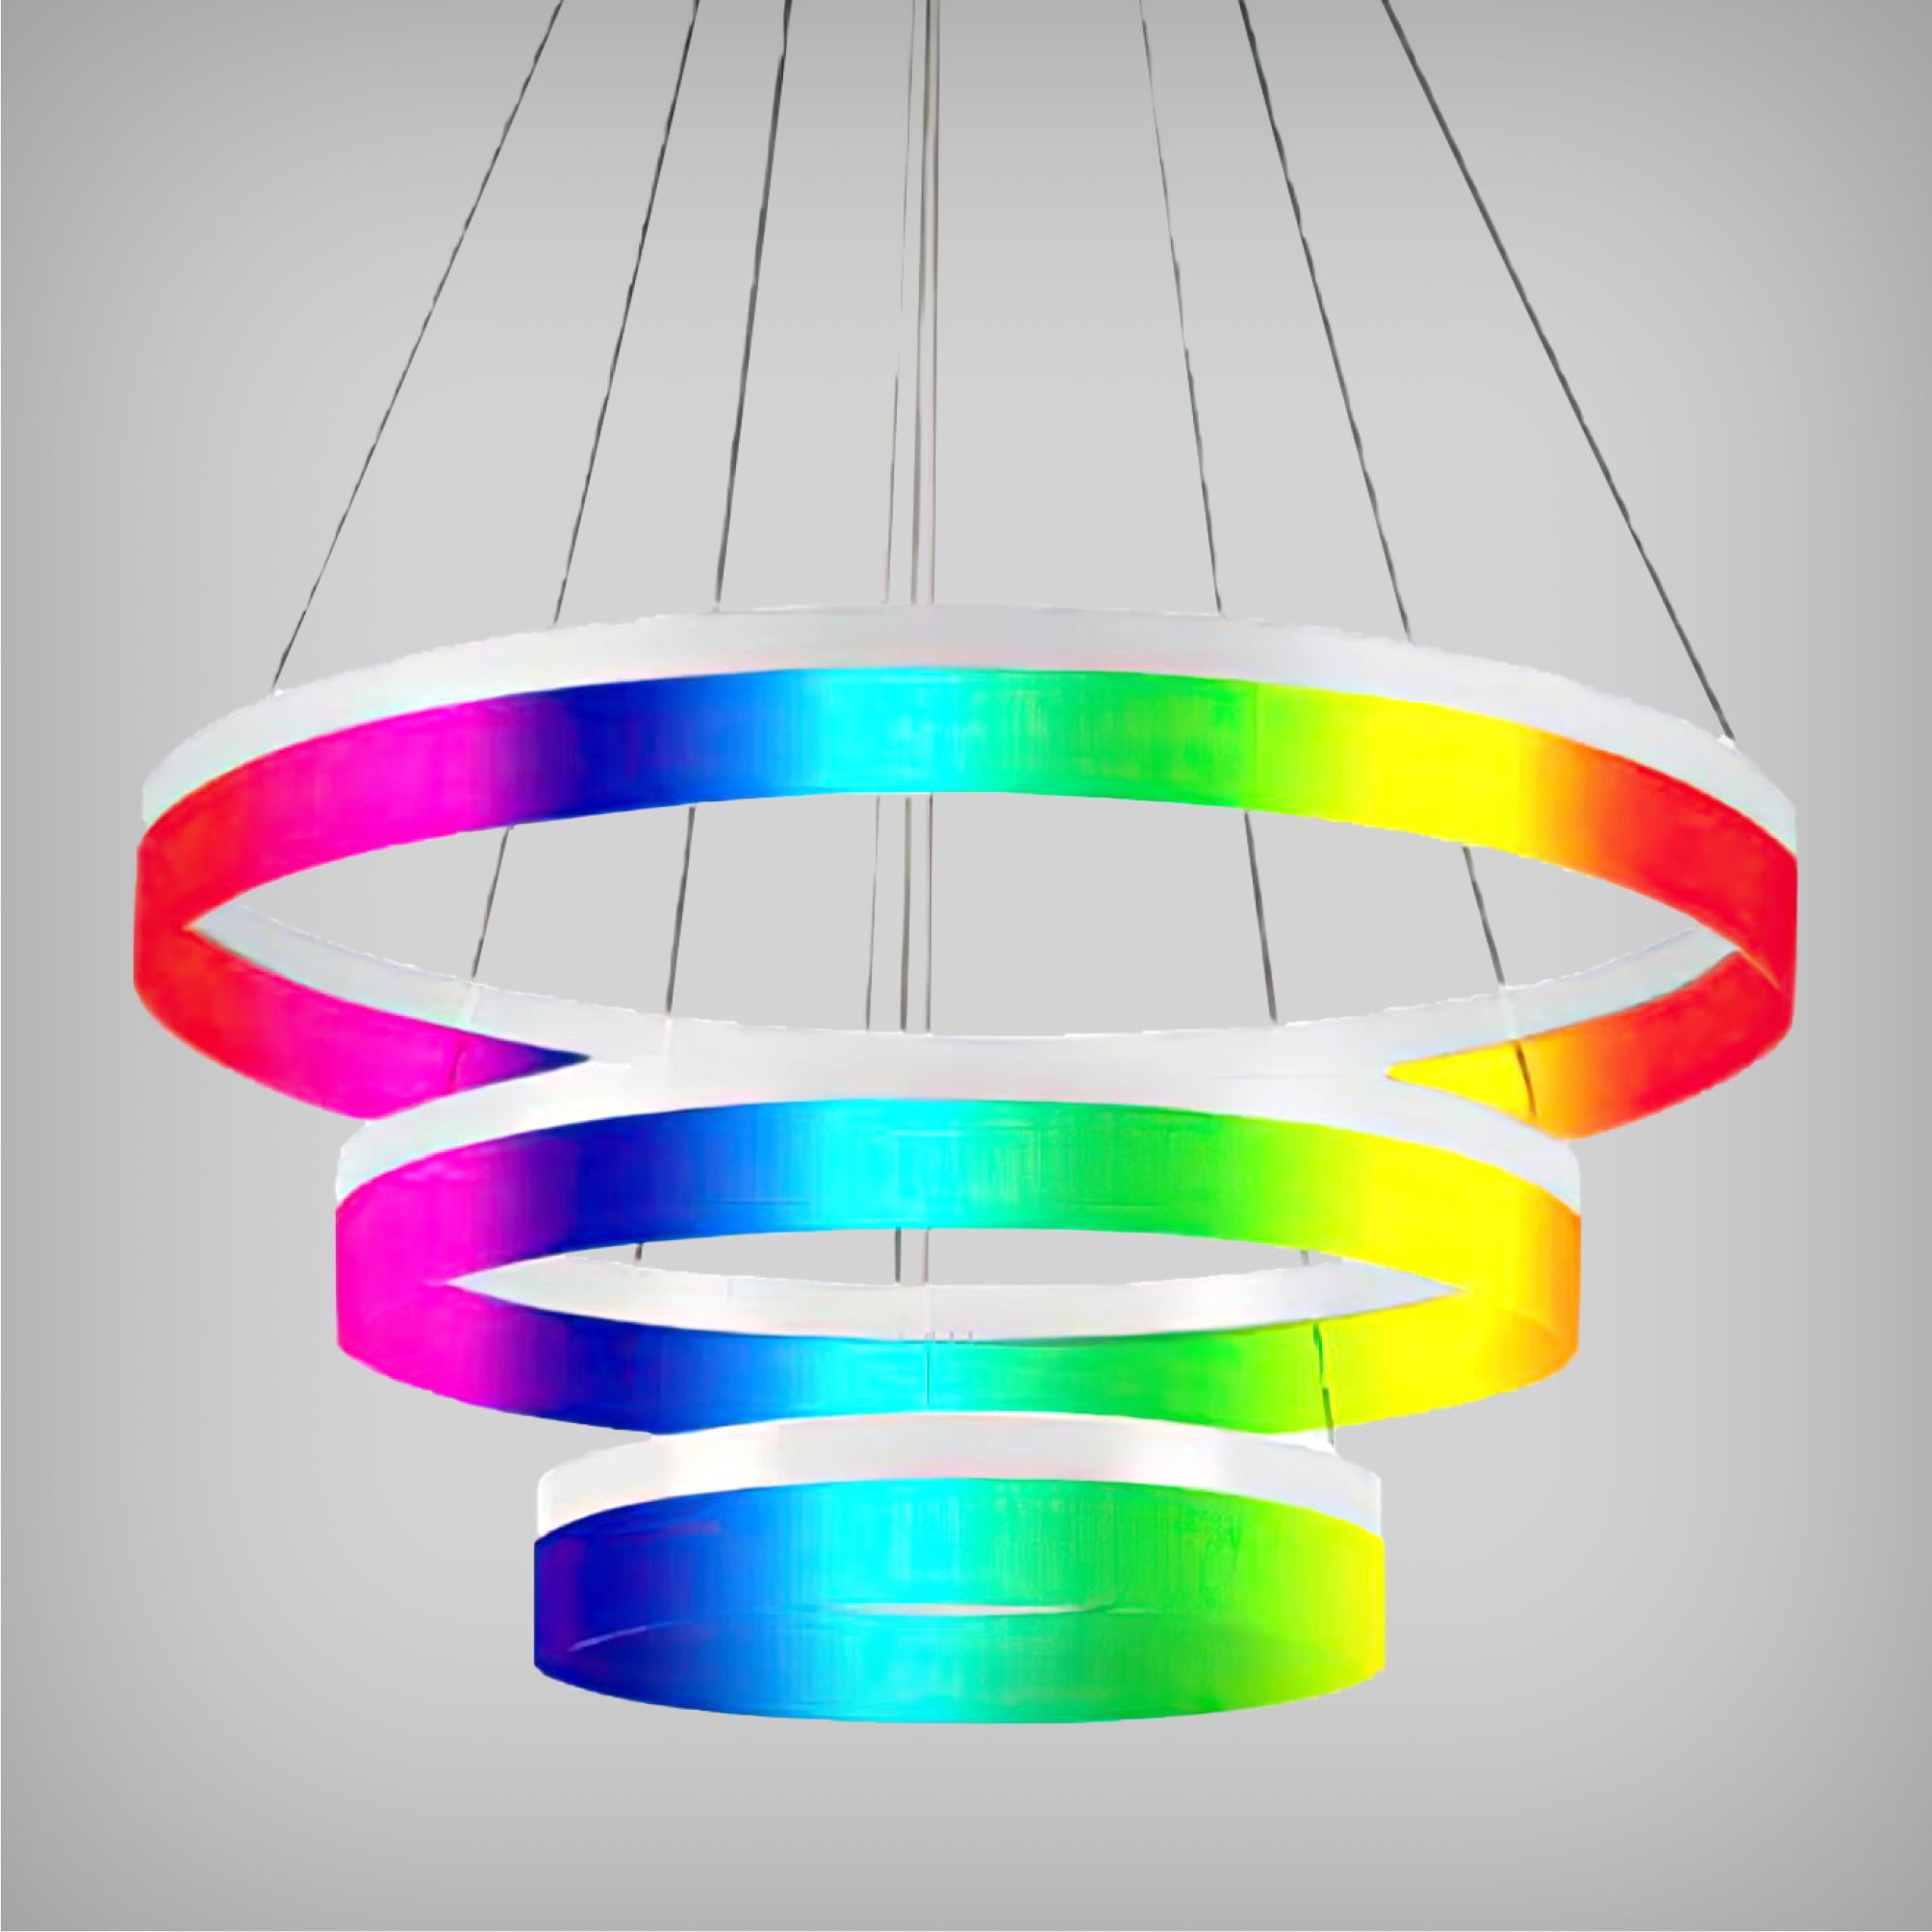 RGBW Architectural LED 3 Tier Ring Chandelier